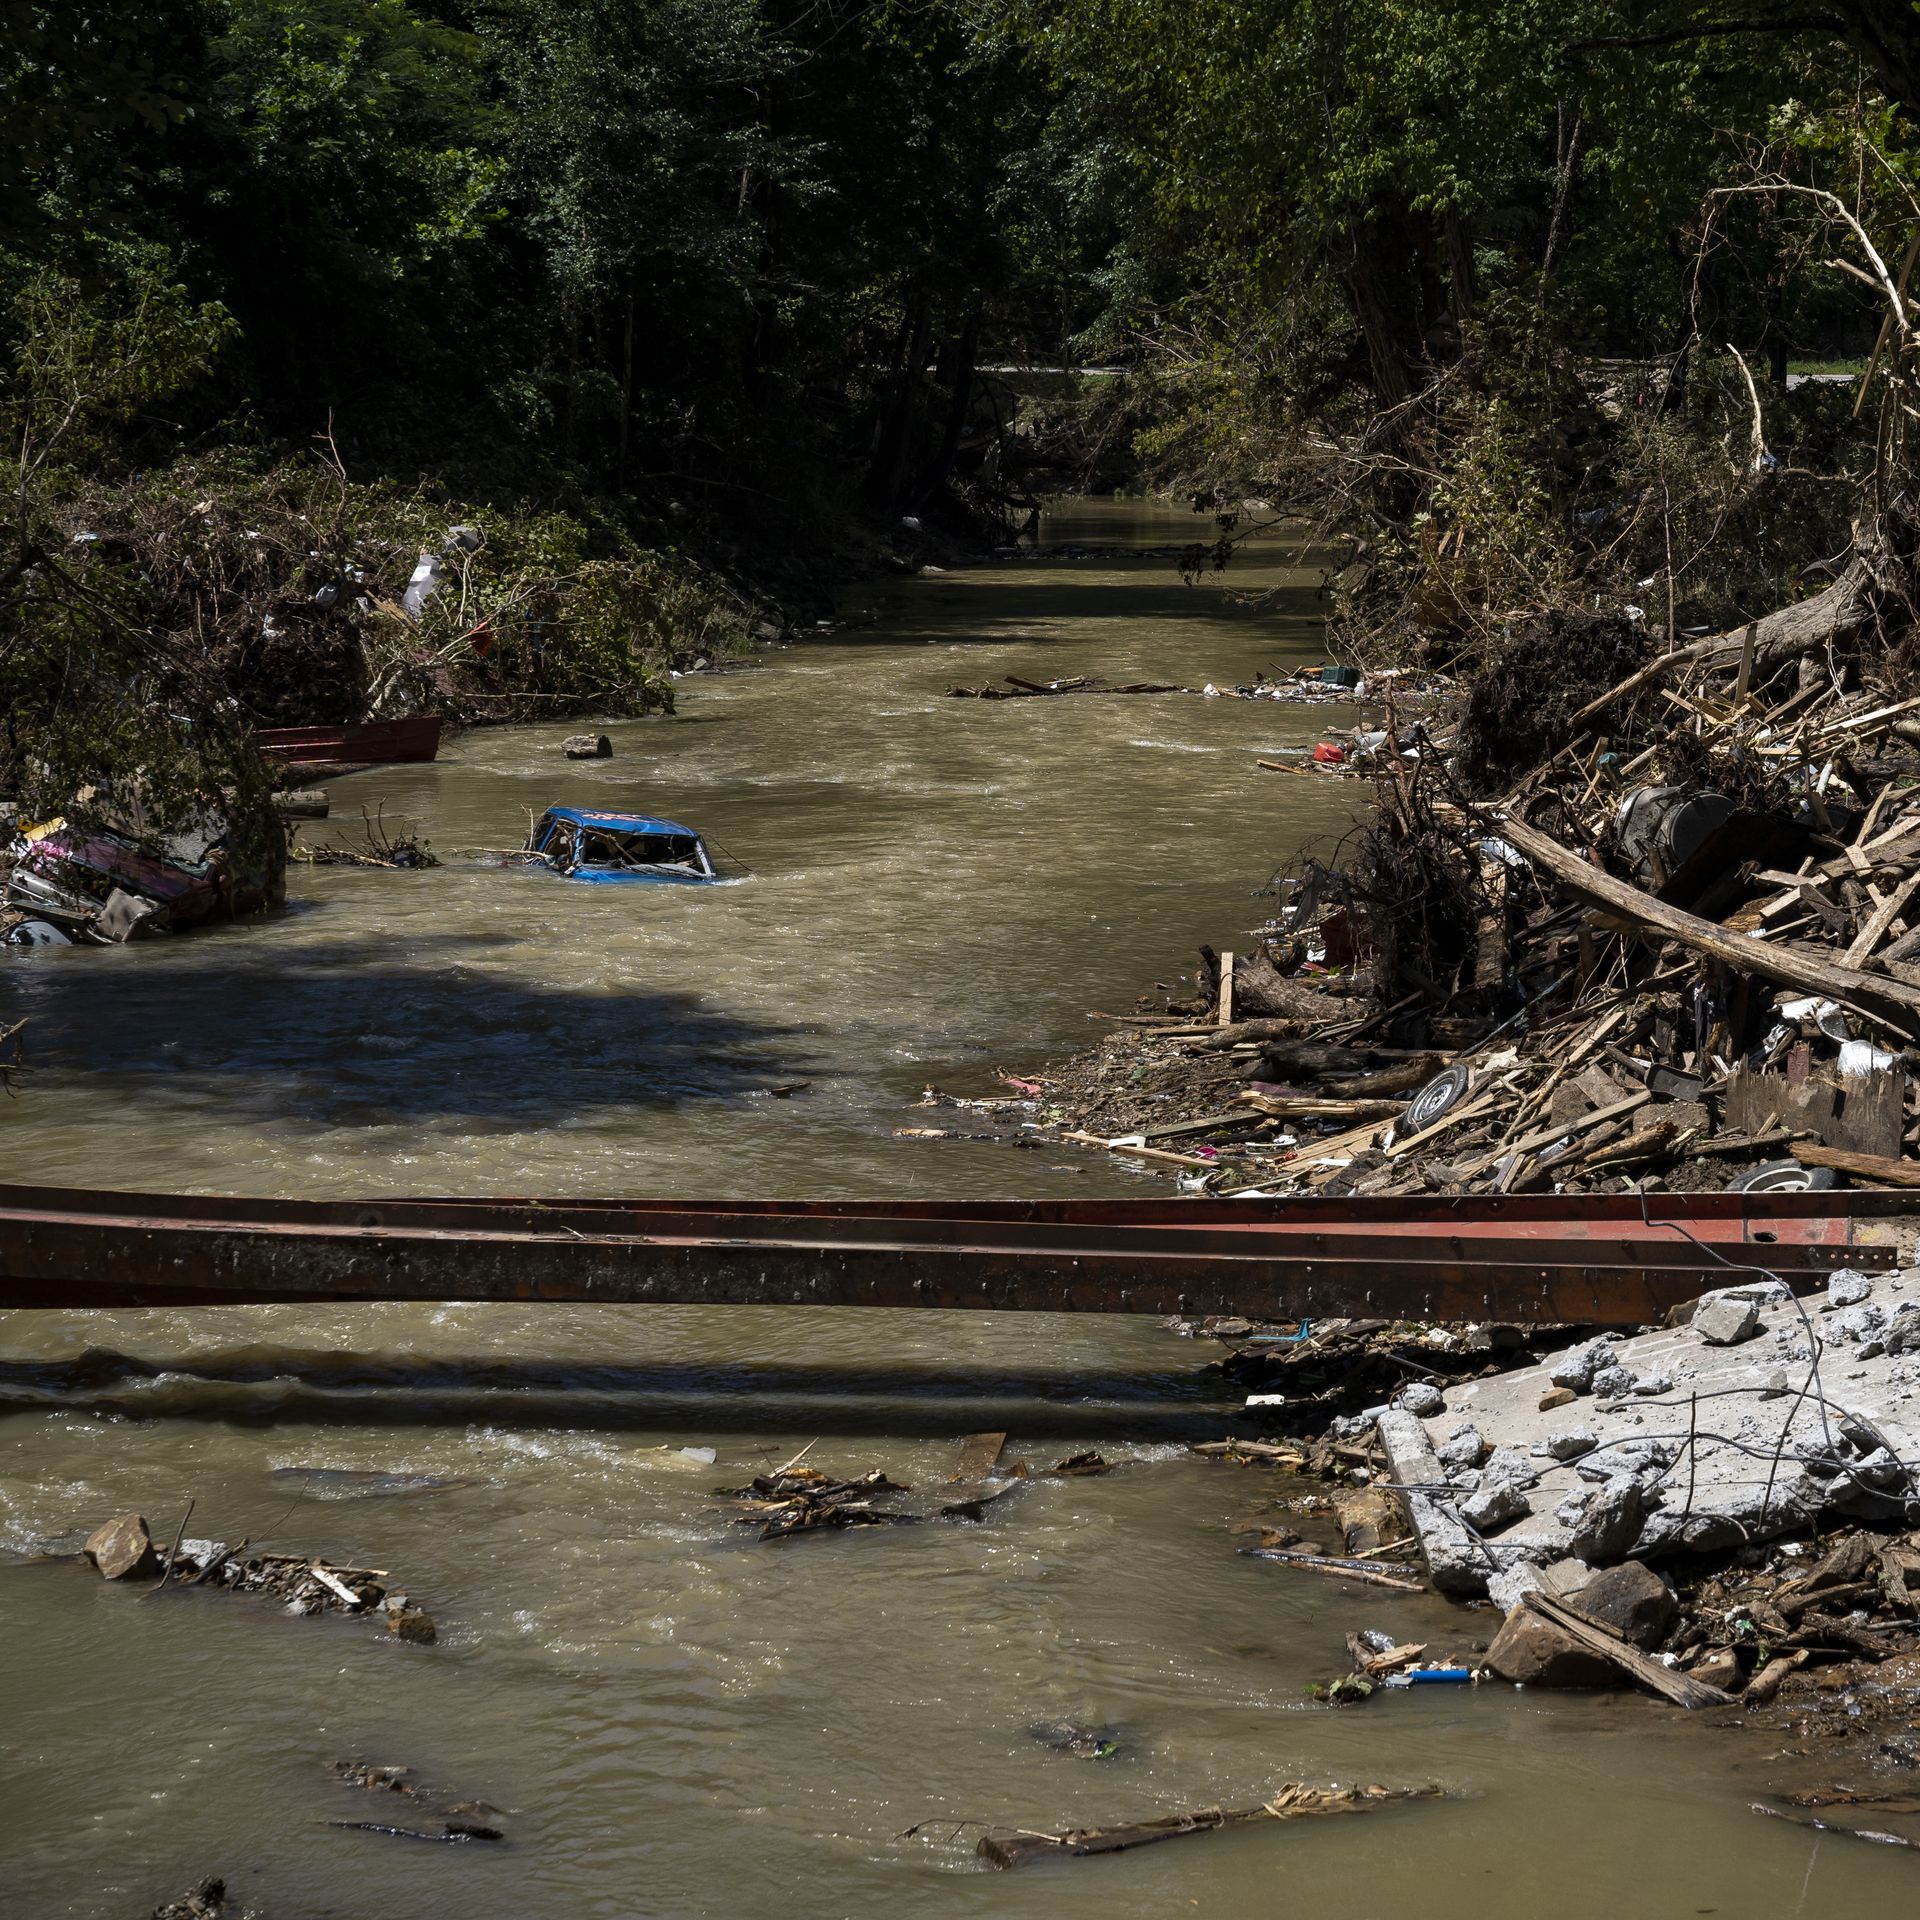  A car is still partially submerged in Troublesome Creek in Perry County, Kentucky near Hazard on August 6.